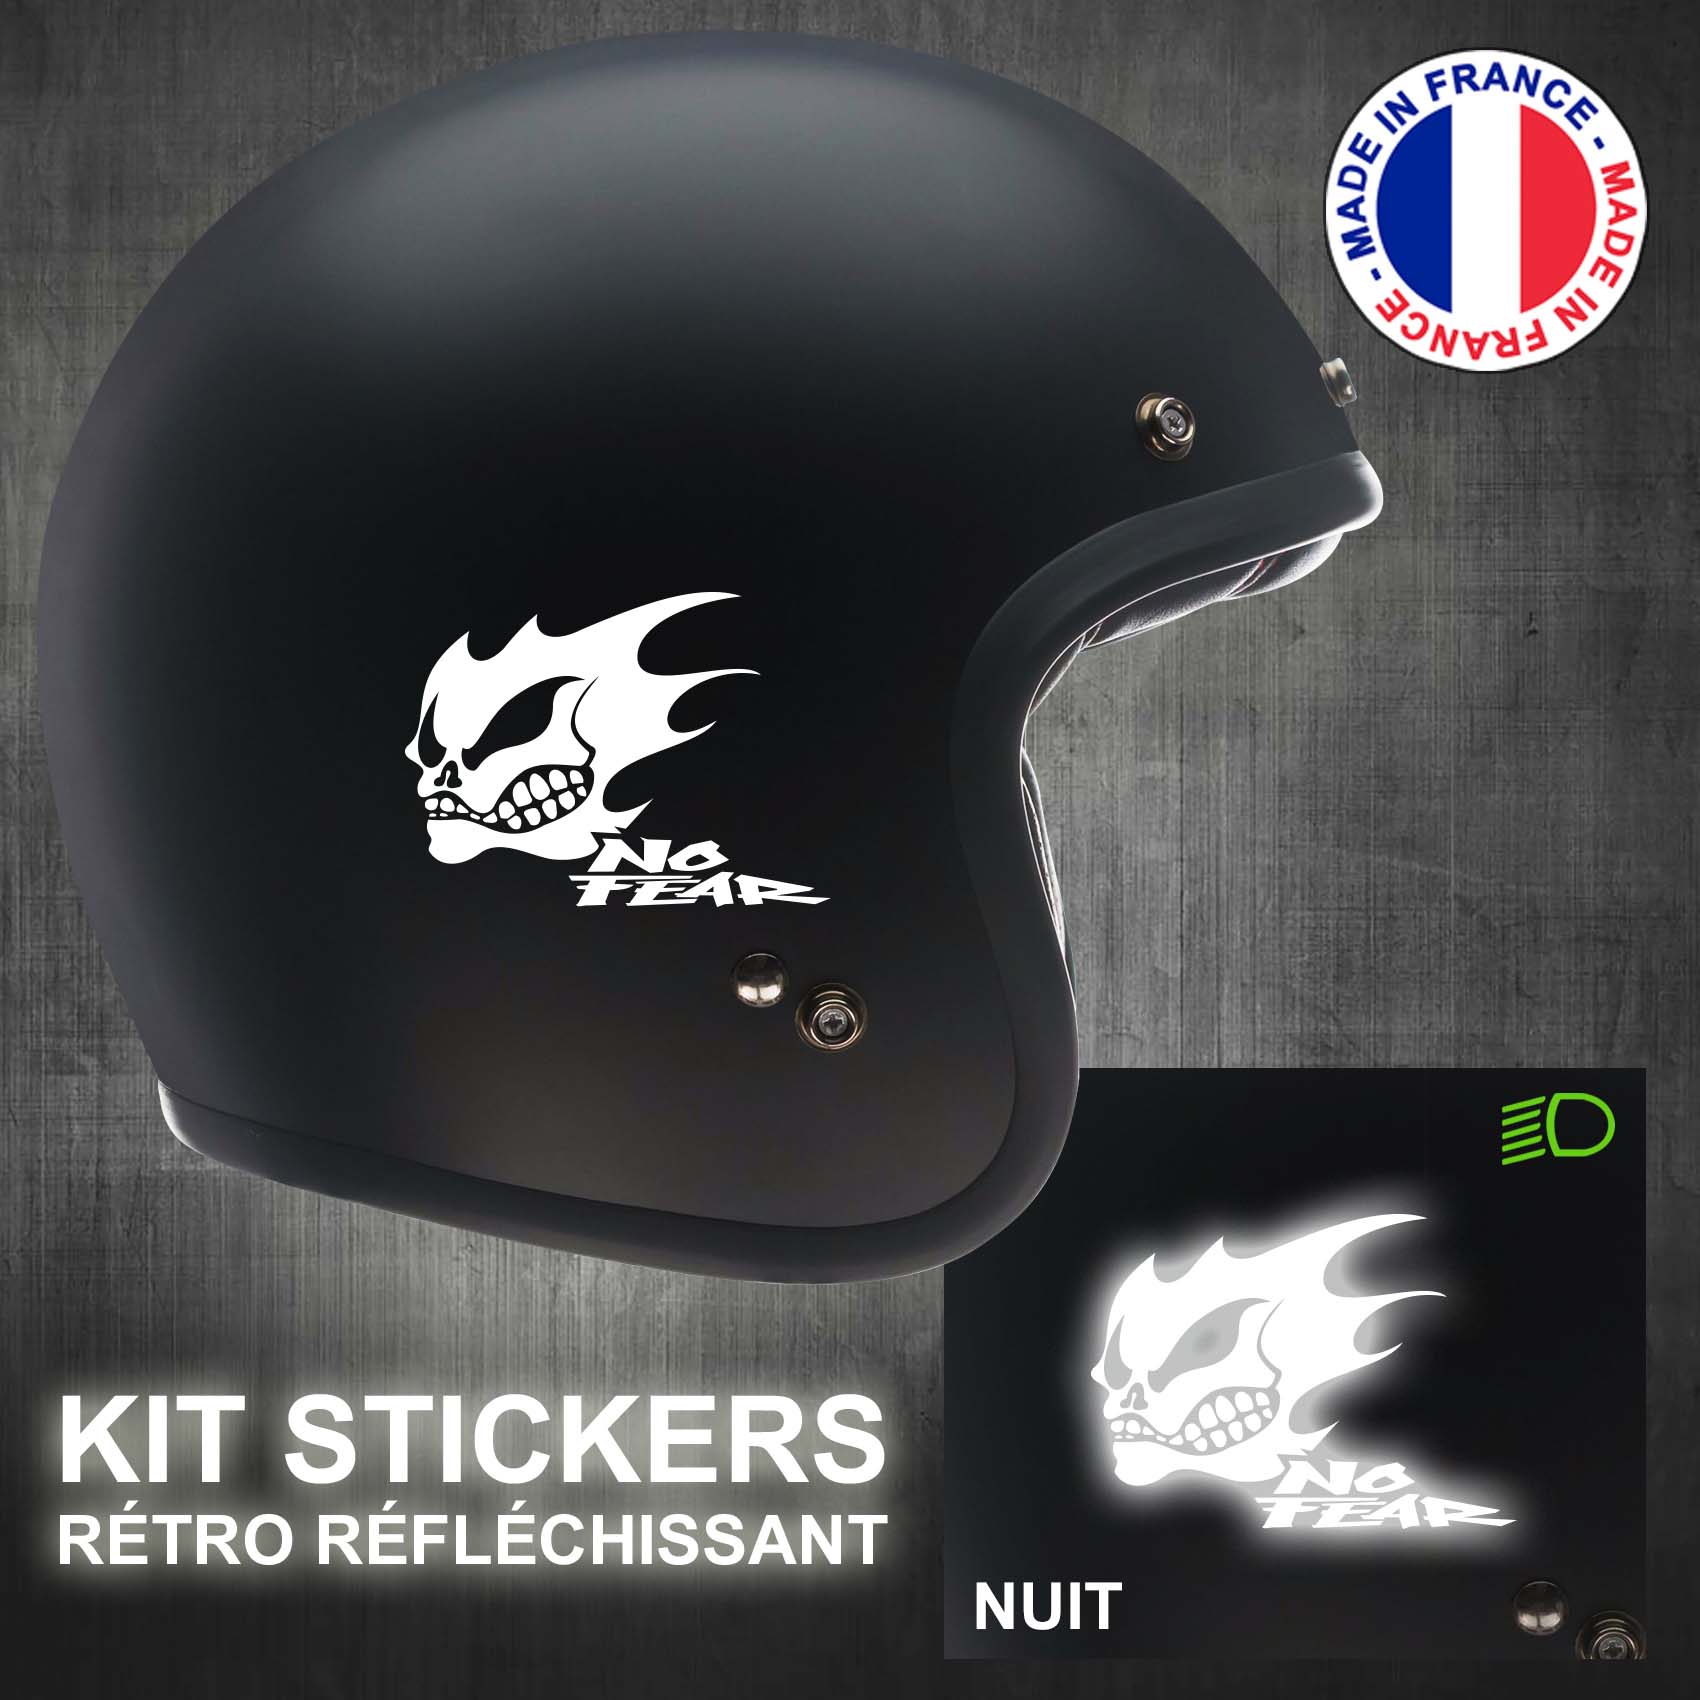 stickers-casque-moto-no-fear-ref4-retro-reflechissant-autocollant-noir-moto-velo-tuning-racing-route-sticker-casques-adhesif-scooter-nuit-securite-decals-personnalise-personnalisable-min